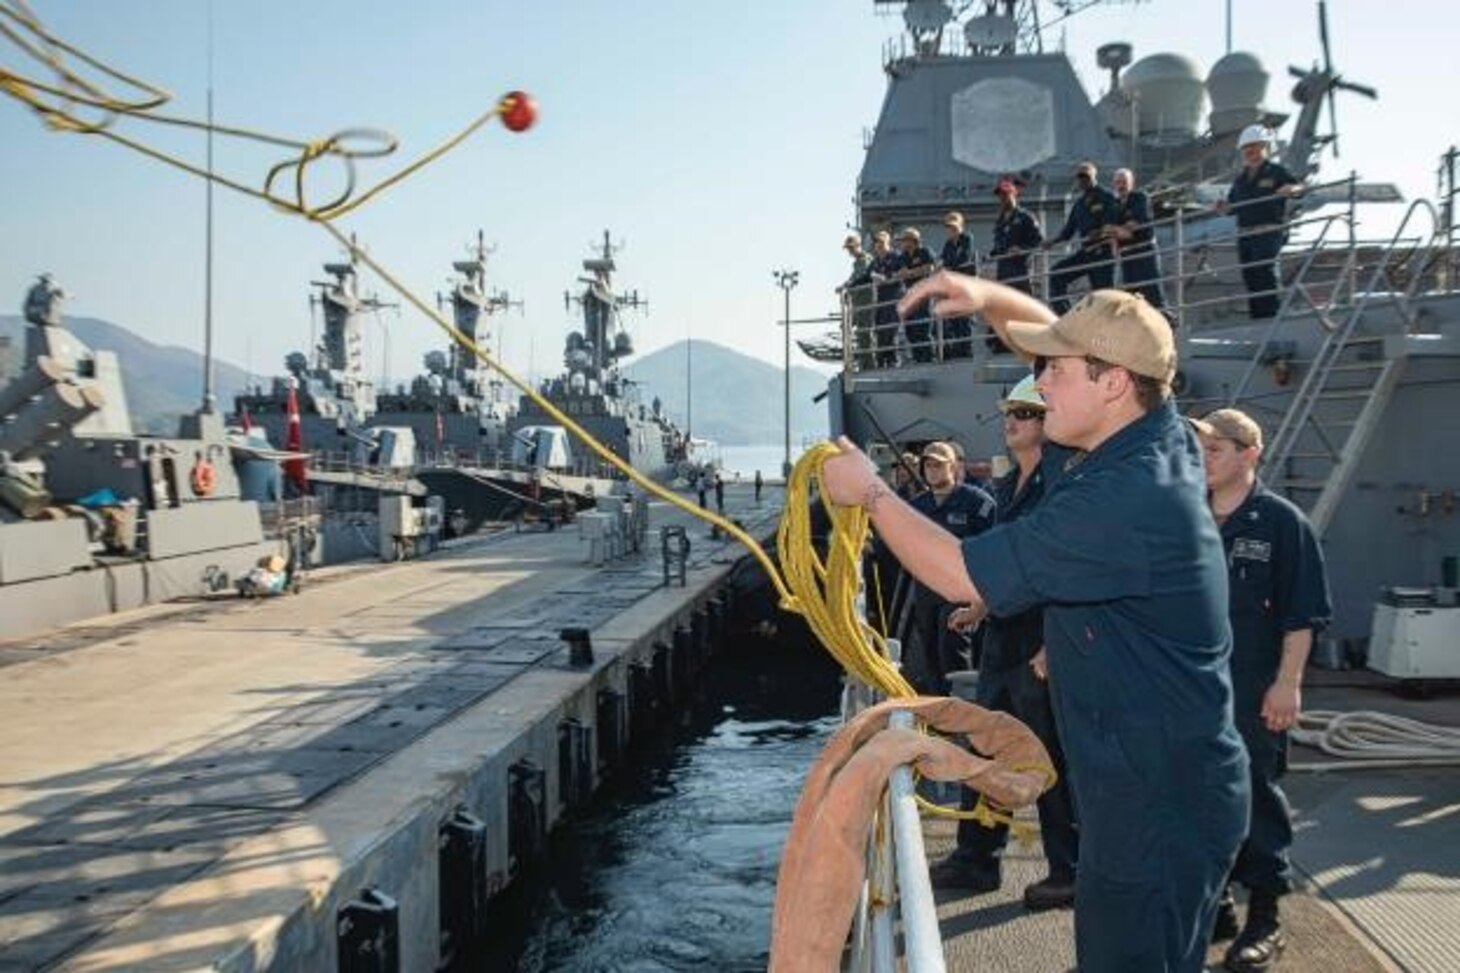 Fire Controlman (AEGIS) 3rd Class Nathan Warren, assigned to the Ticonderoga-class guided missile cruiser USS Normandy (CG 60), throws a heaving line to the pier, as the ship pulls in Aksaz Naval Base, Turkiye, Aug. 26, 2023. Normandy is part of the Gerald R. Ford Carrier Strike Group and is on a scheduled deployment in the U.S. Naval Forces Europe area of operations, employed by Sixth Fleet to defend U.S., allied, and partner interests. (U.S. Navy photo by Mass Communication Specialist 2nd Class Malachi Lakey)